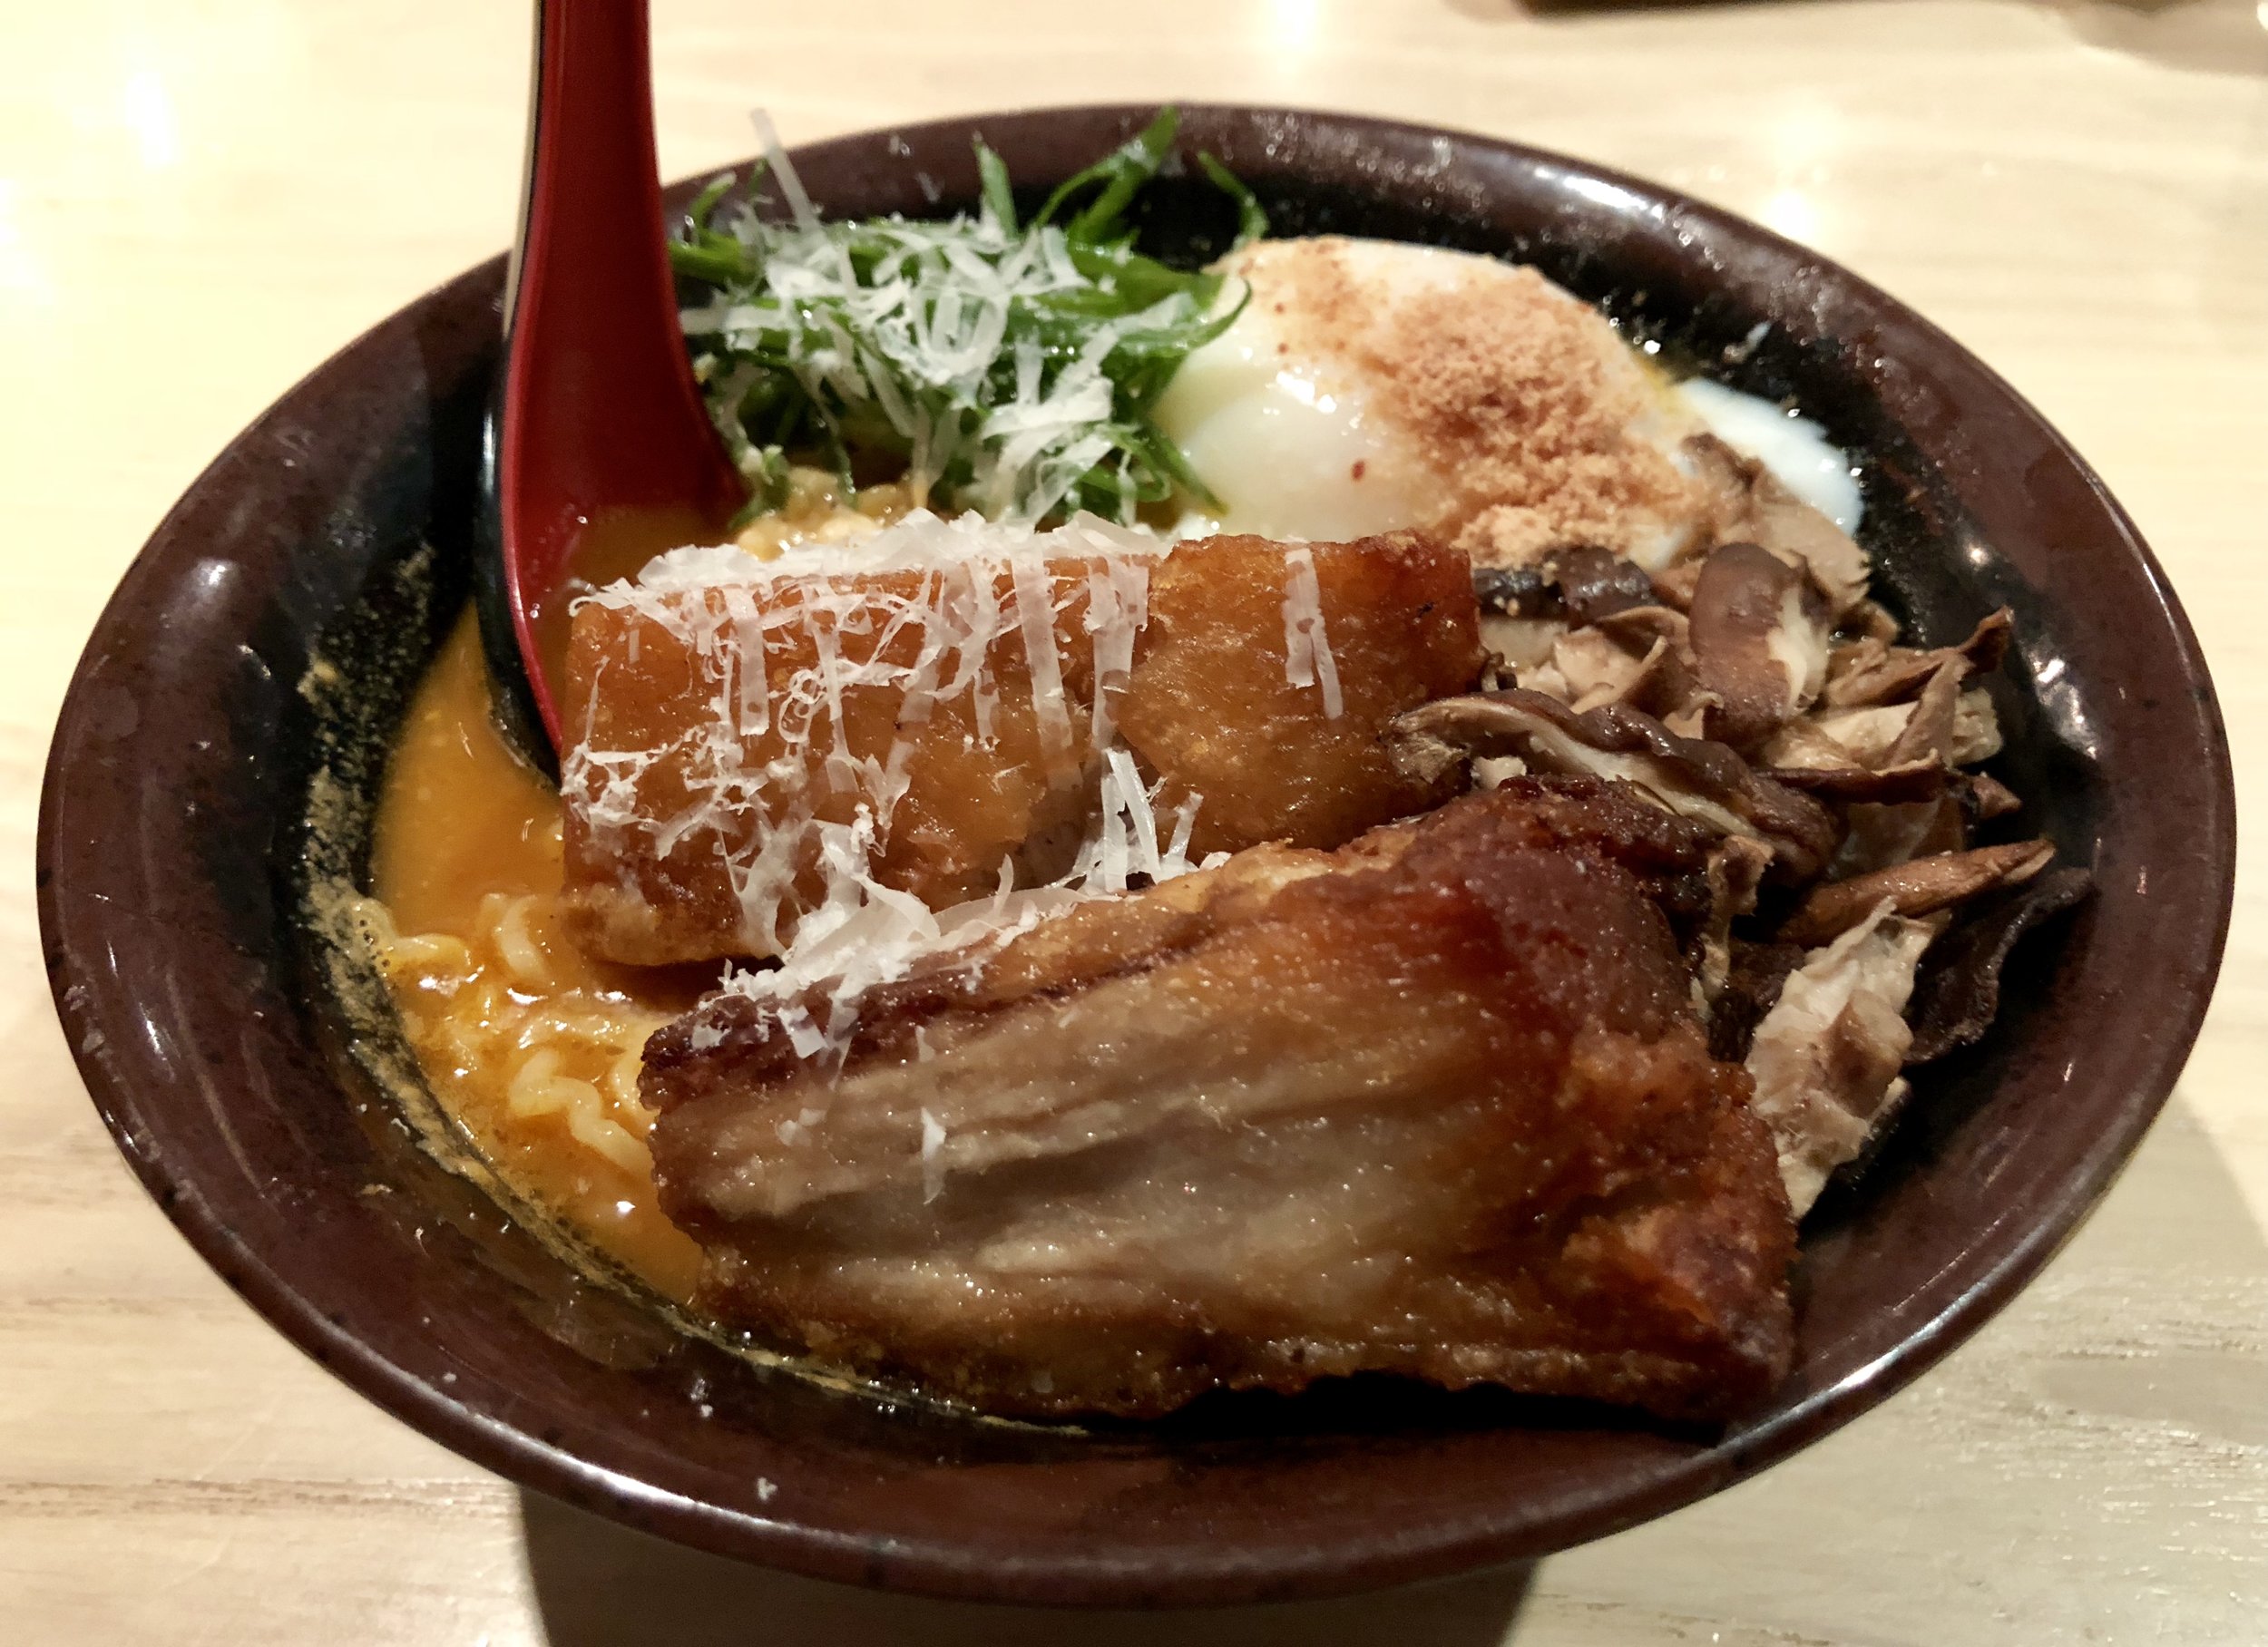  Pictured: MW Ramen with spicy tare, pork belly, shiitake, scallion, country ham 